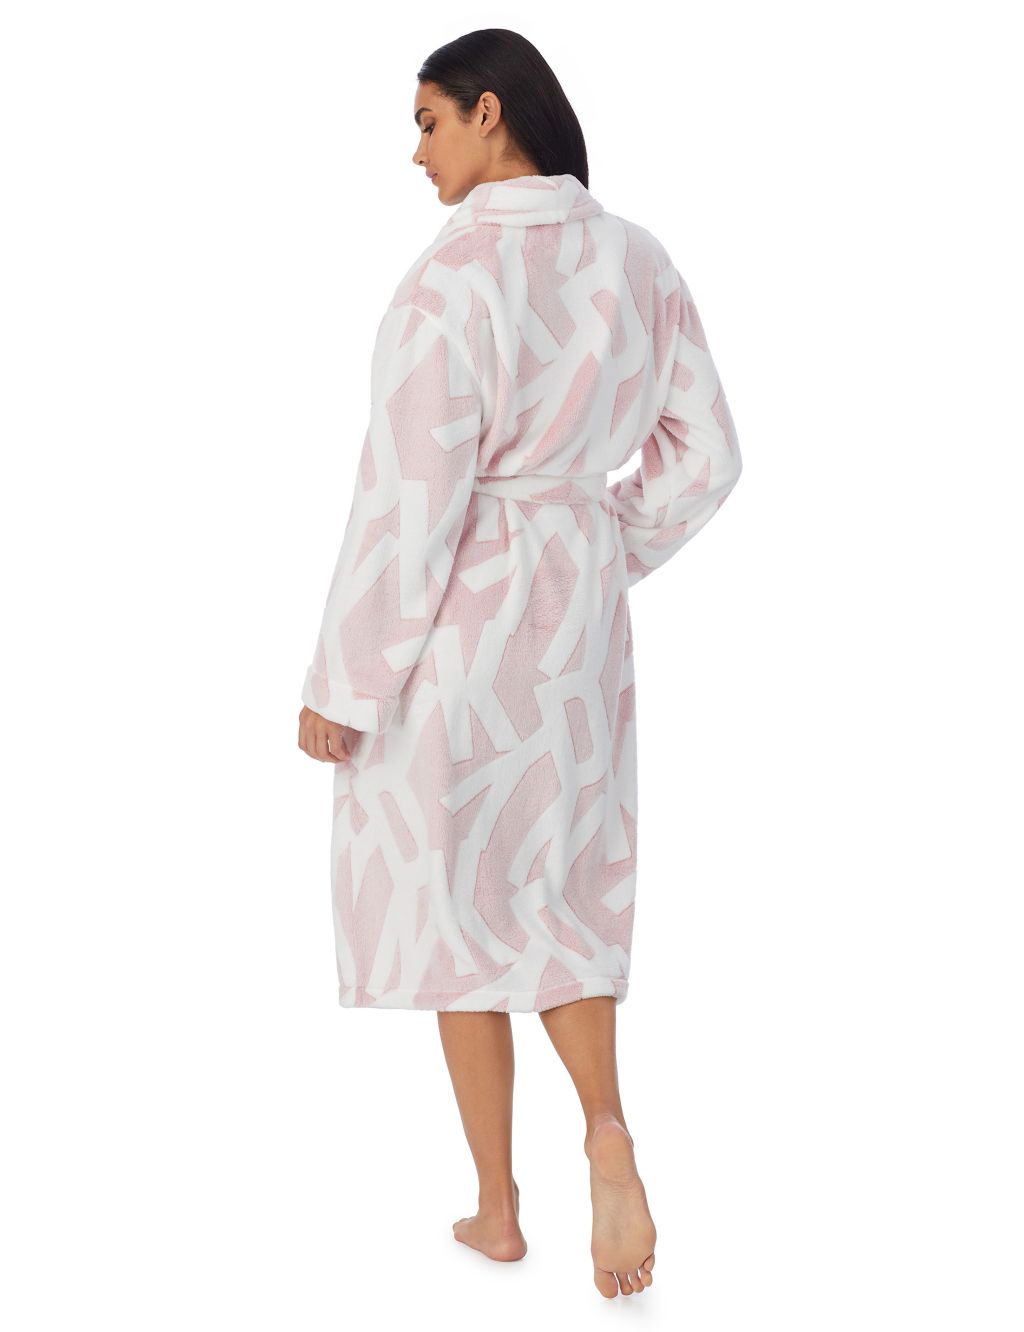 Dressing Gown image 3